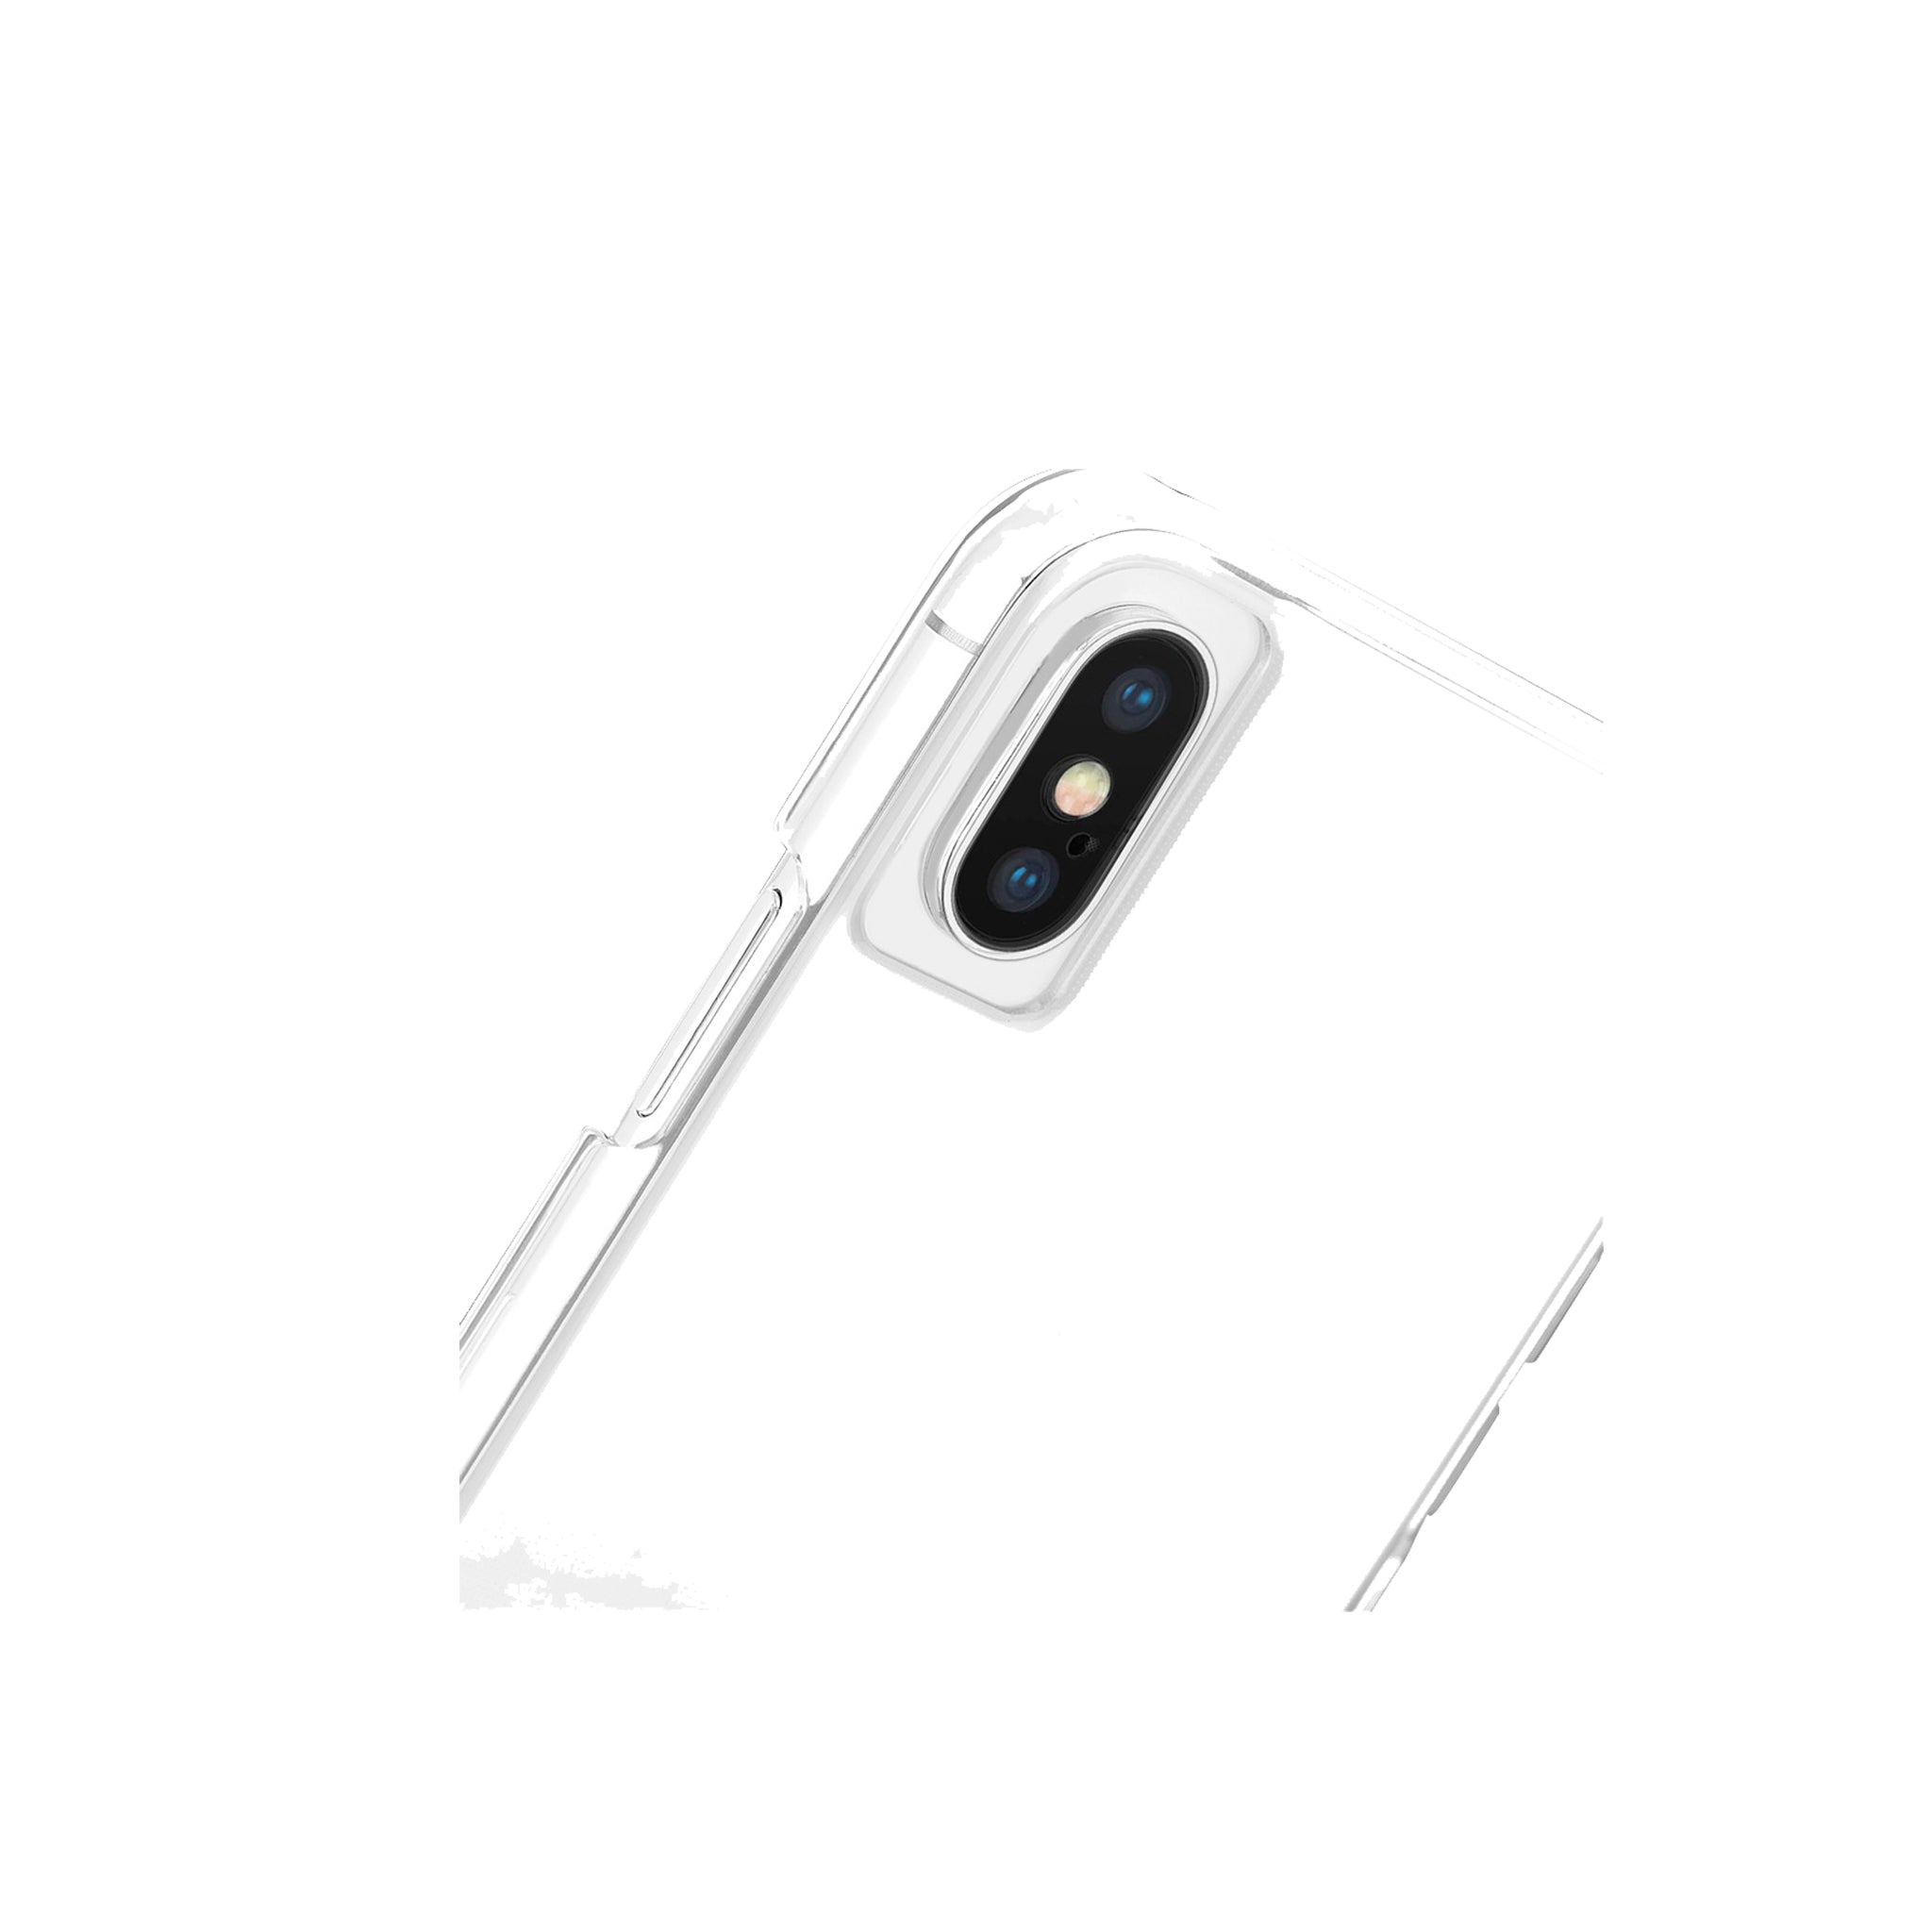 Case-mate - Barely There Case For Apple iPhone Xs / X - Clear